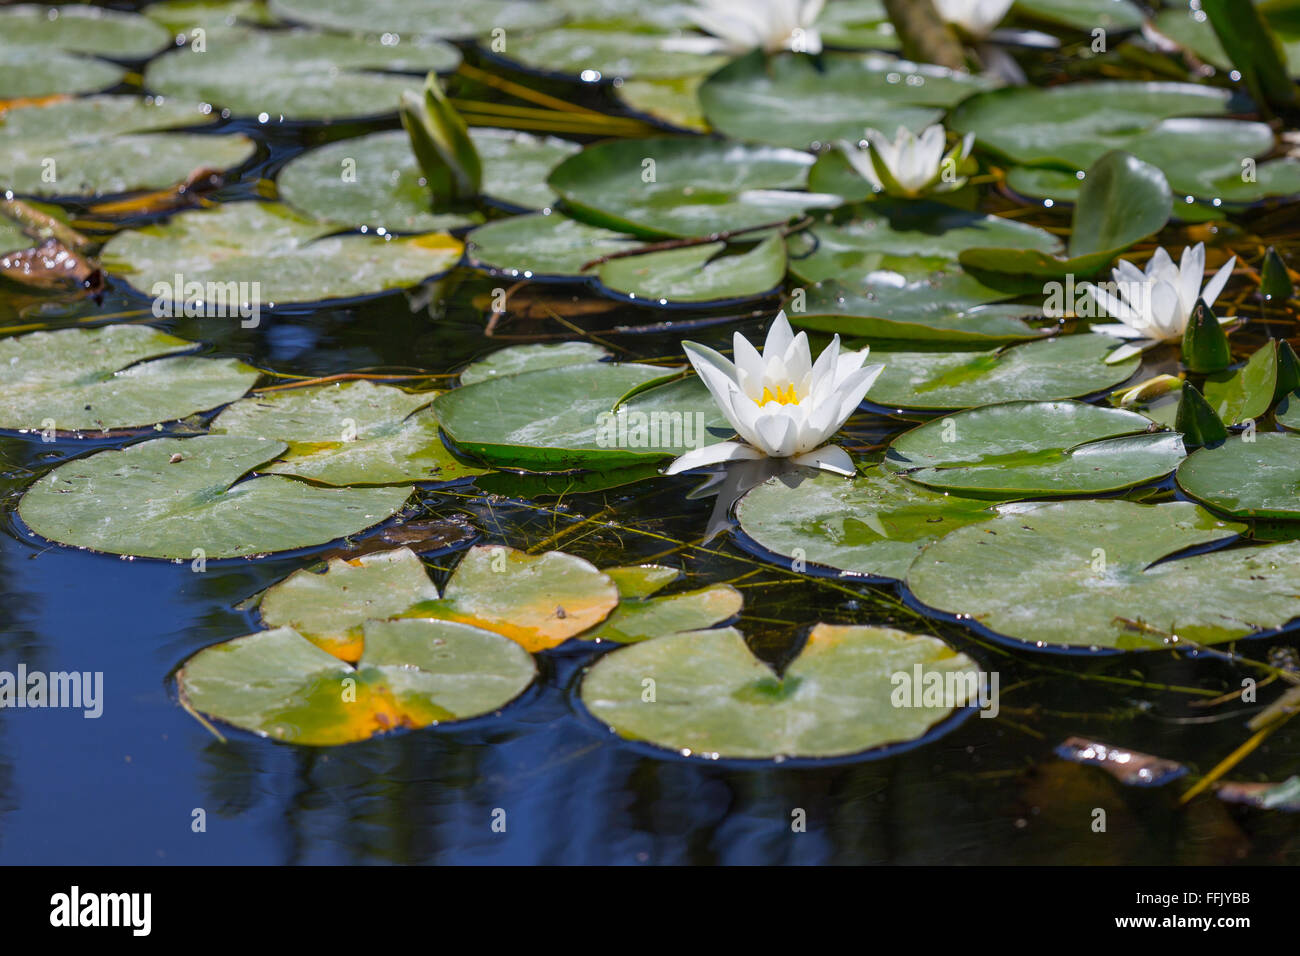 Nymphaeaceae pond water lilies Stock Photo